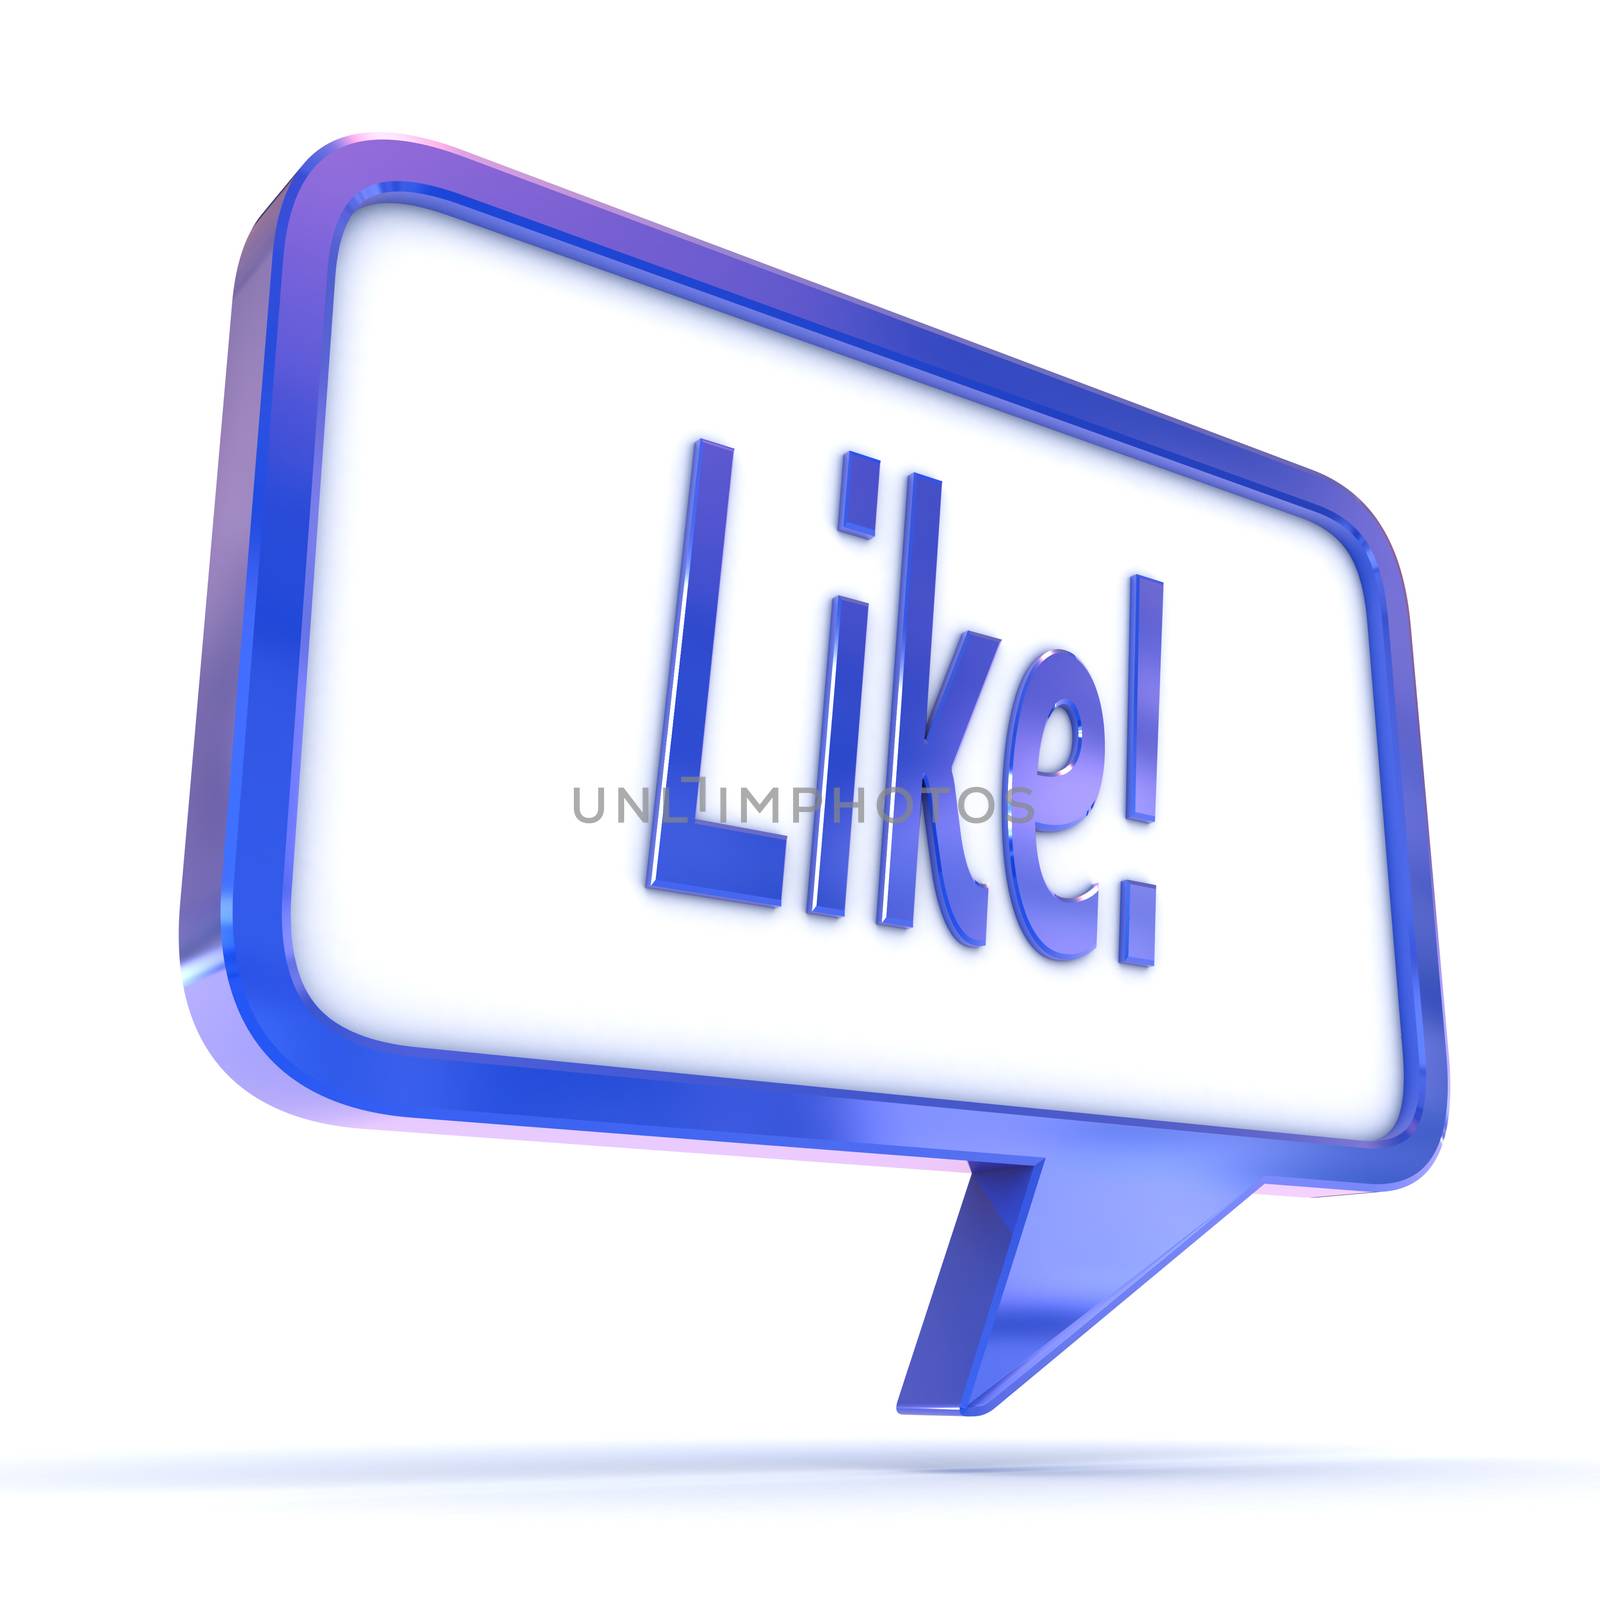 A Colourful 3d Rendered Concept Illustration showing "Like" in a Speech Bubble